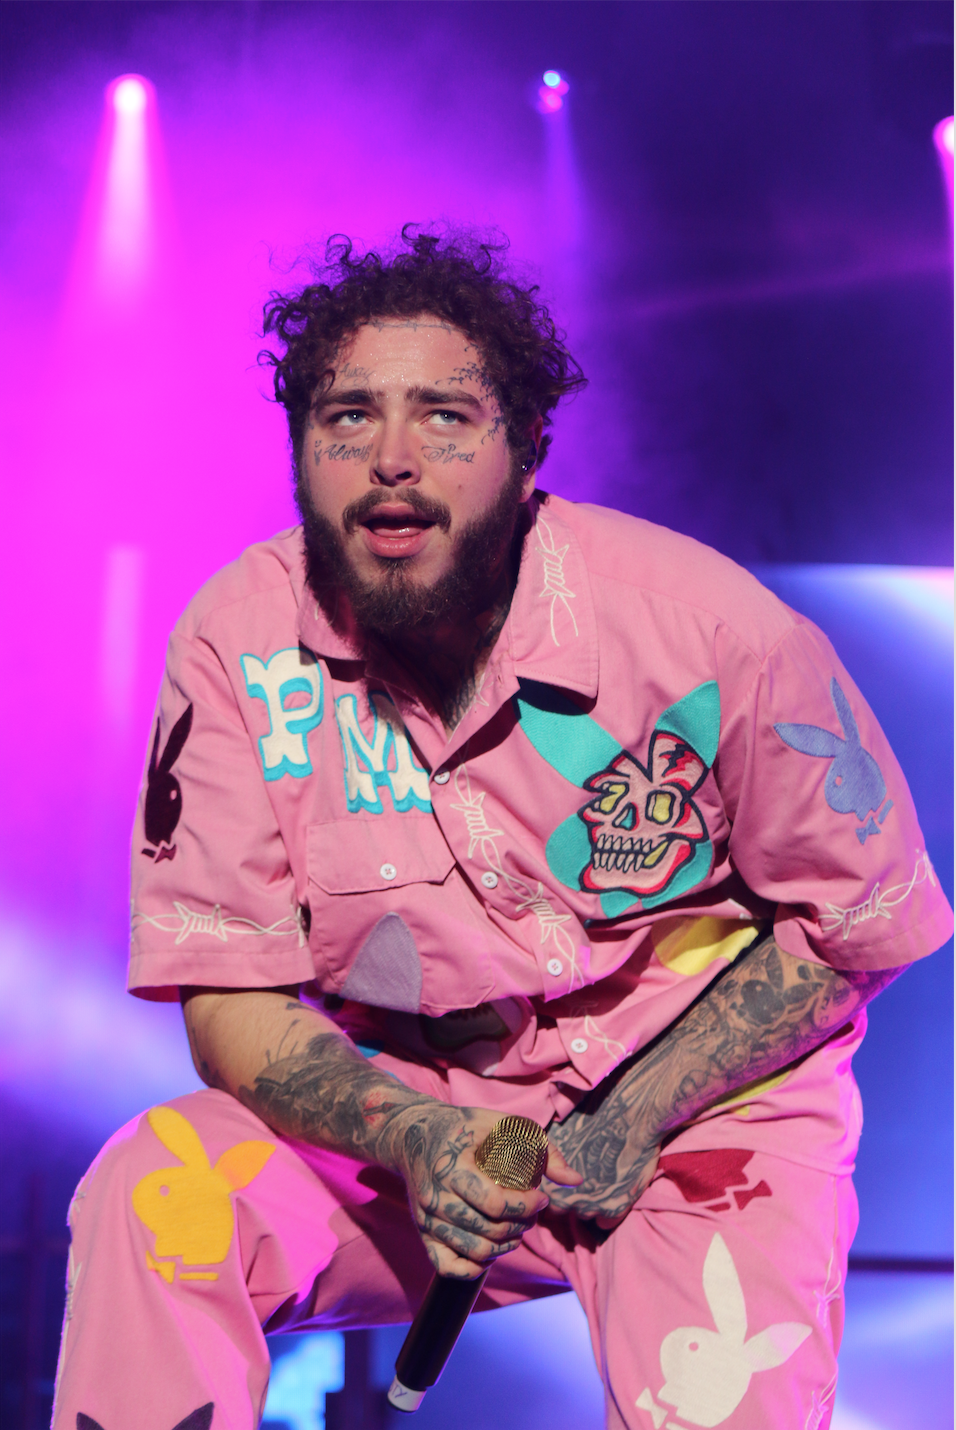 Post Malone’s Manager has Fans Eager for Upcoming “Surprise”